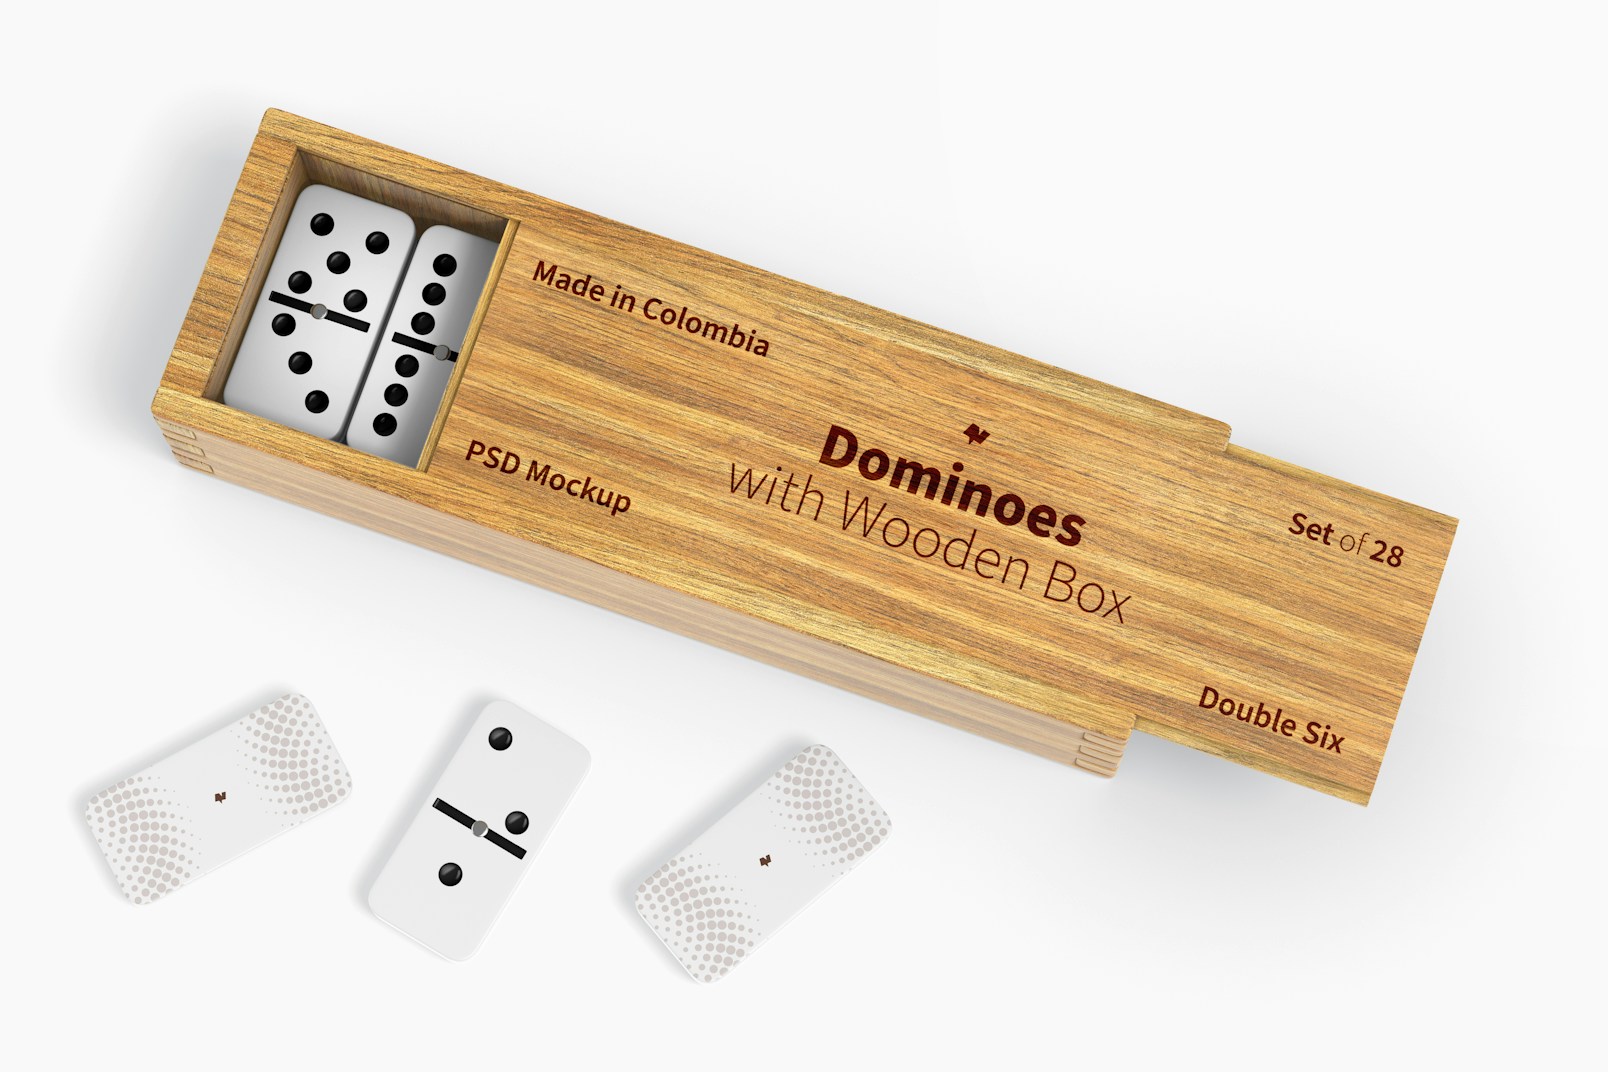 Dominoes with Wooden Box Mockup, Perspective